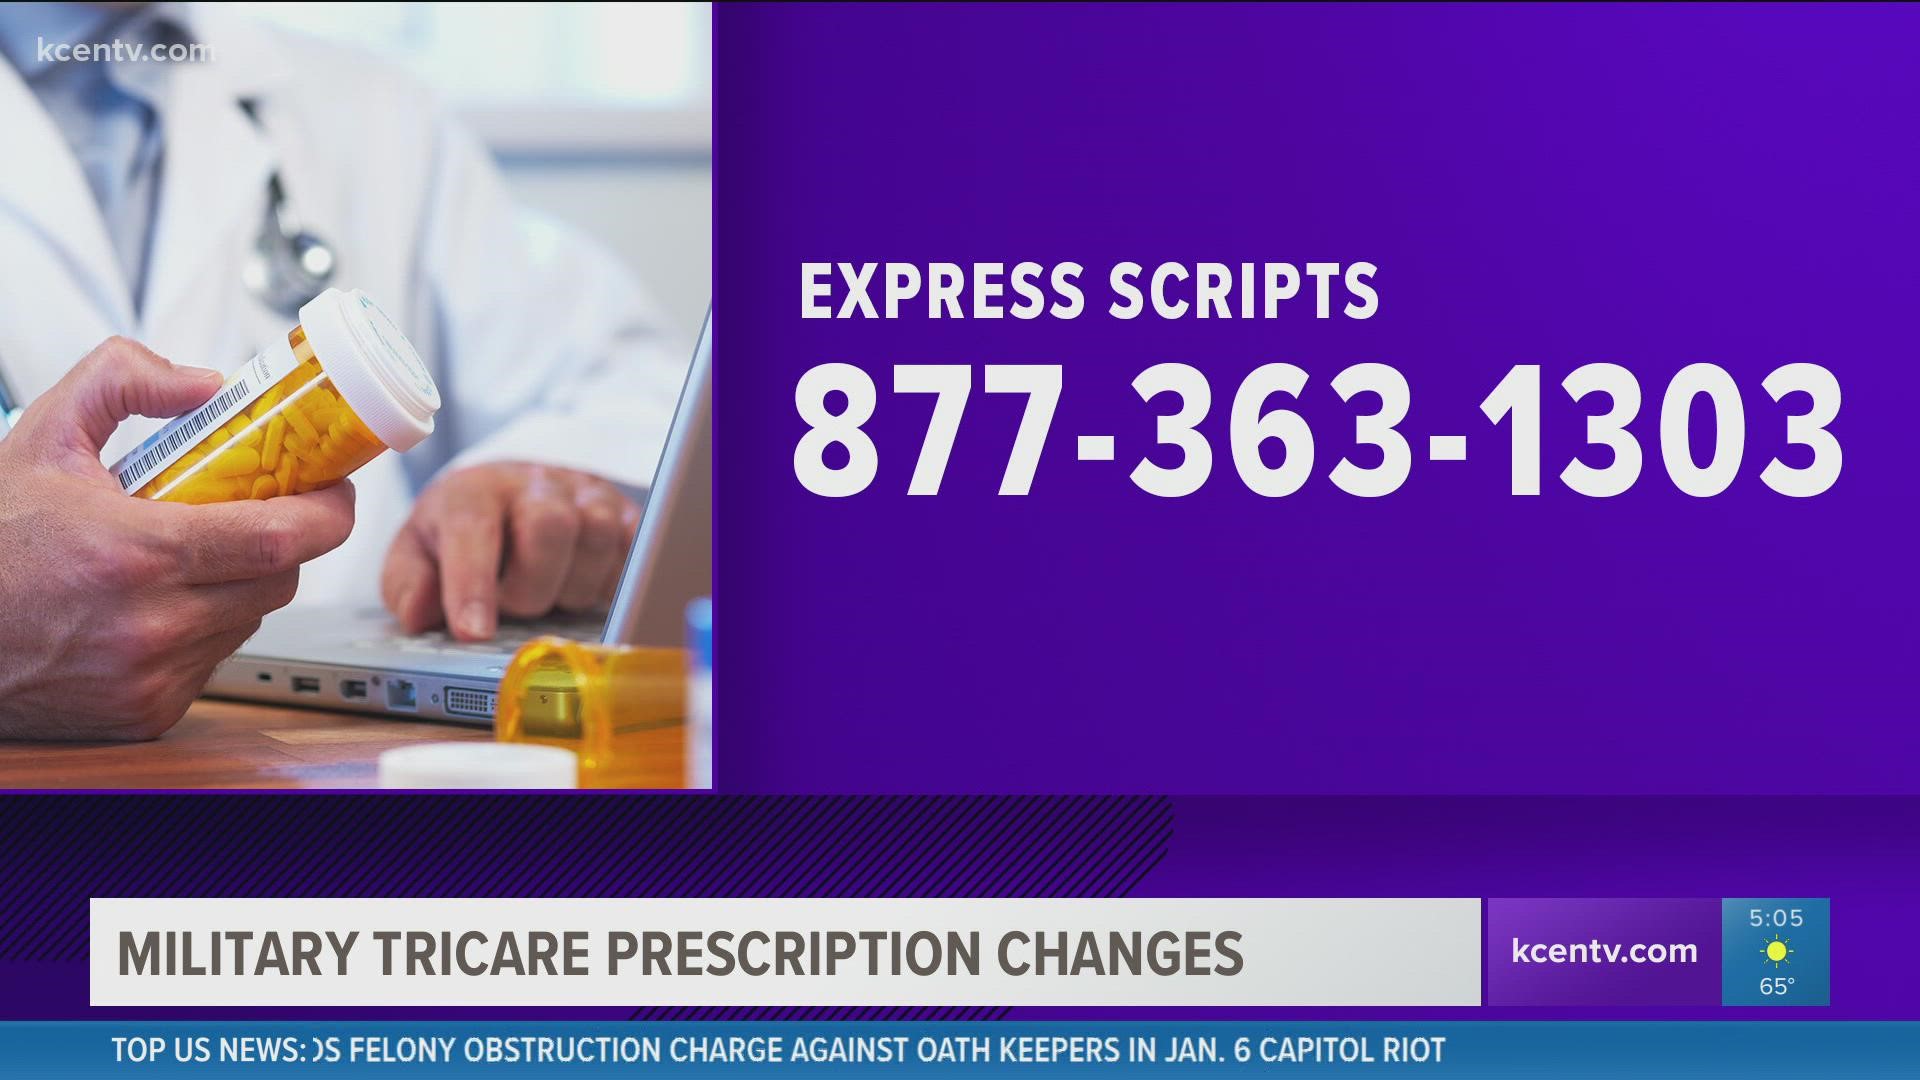 Tricare recipients have to get prescriptions from CVS now, instead of Walmart.